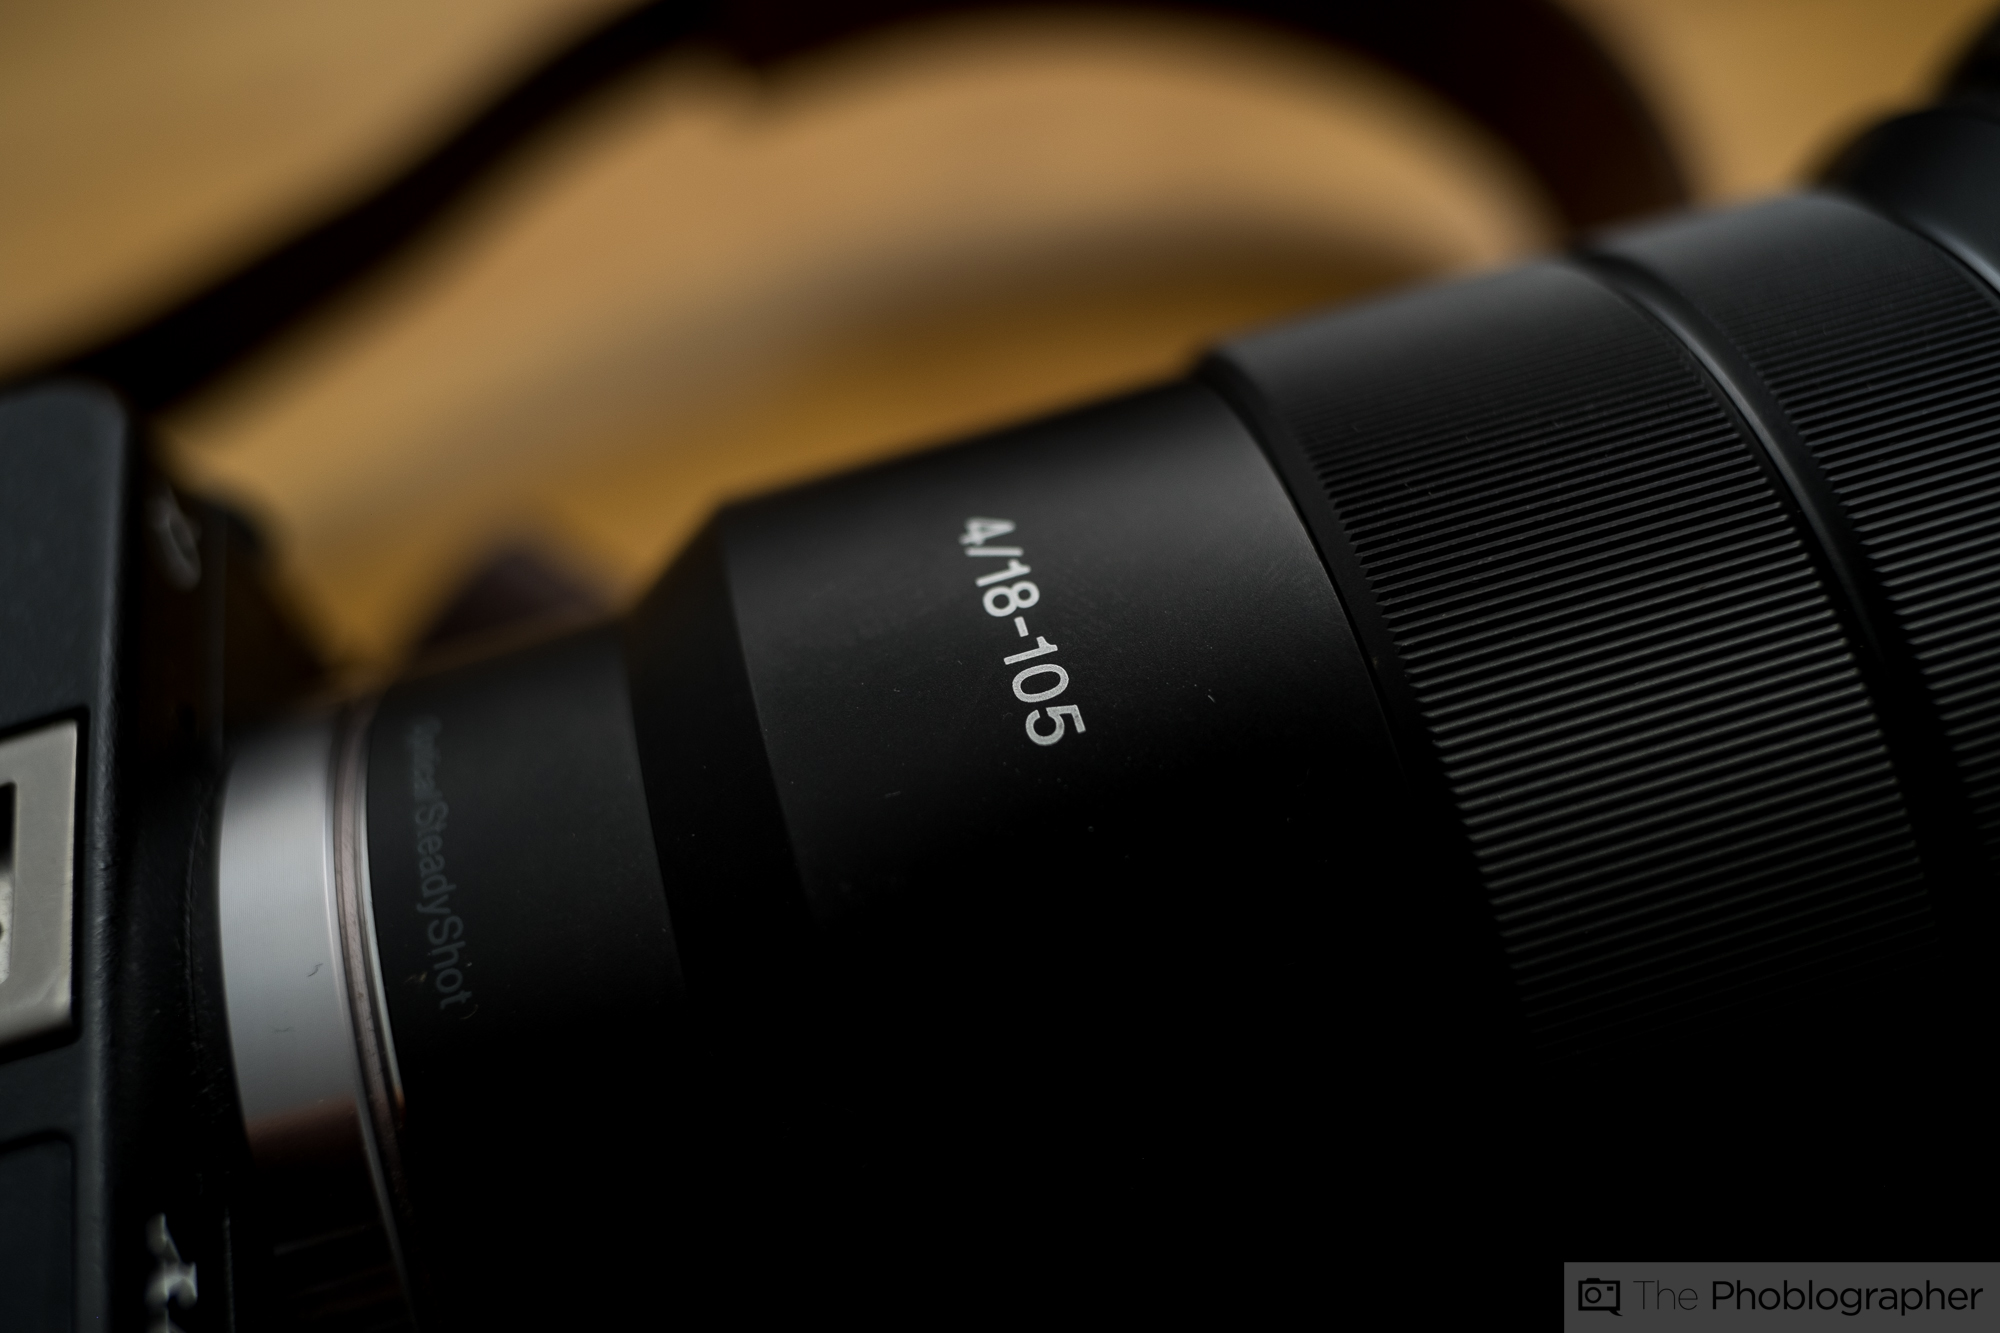 Review: Sony 18-105mm f4 G OSS (APS-C E Mount) - The Phoblographer